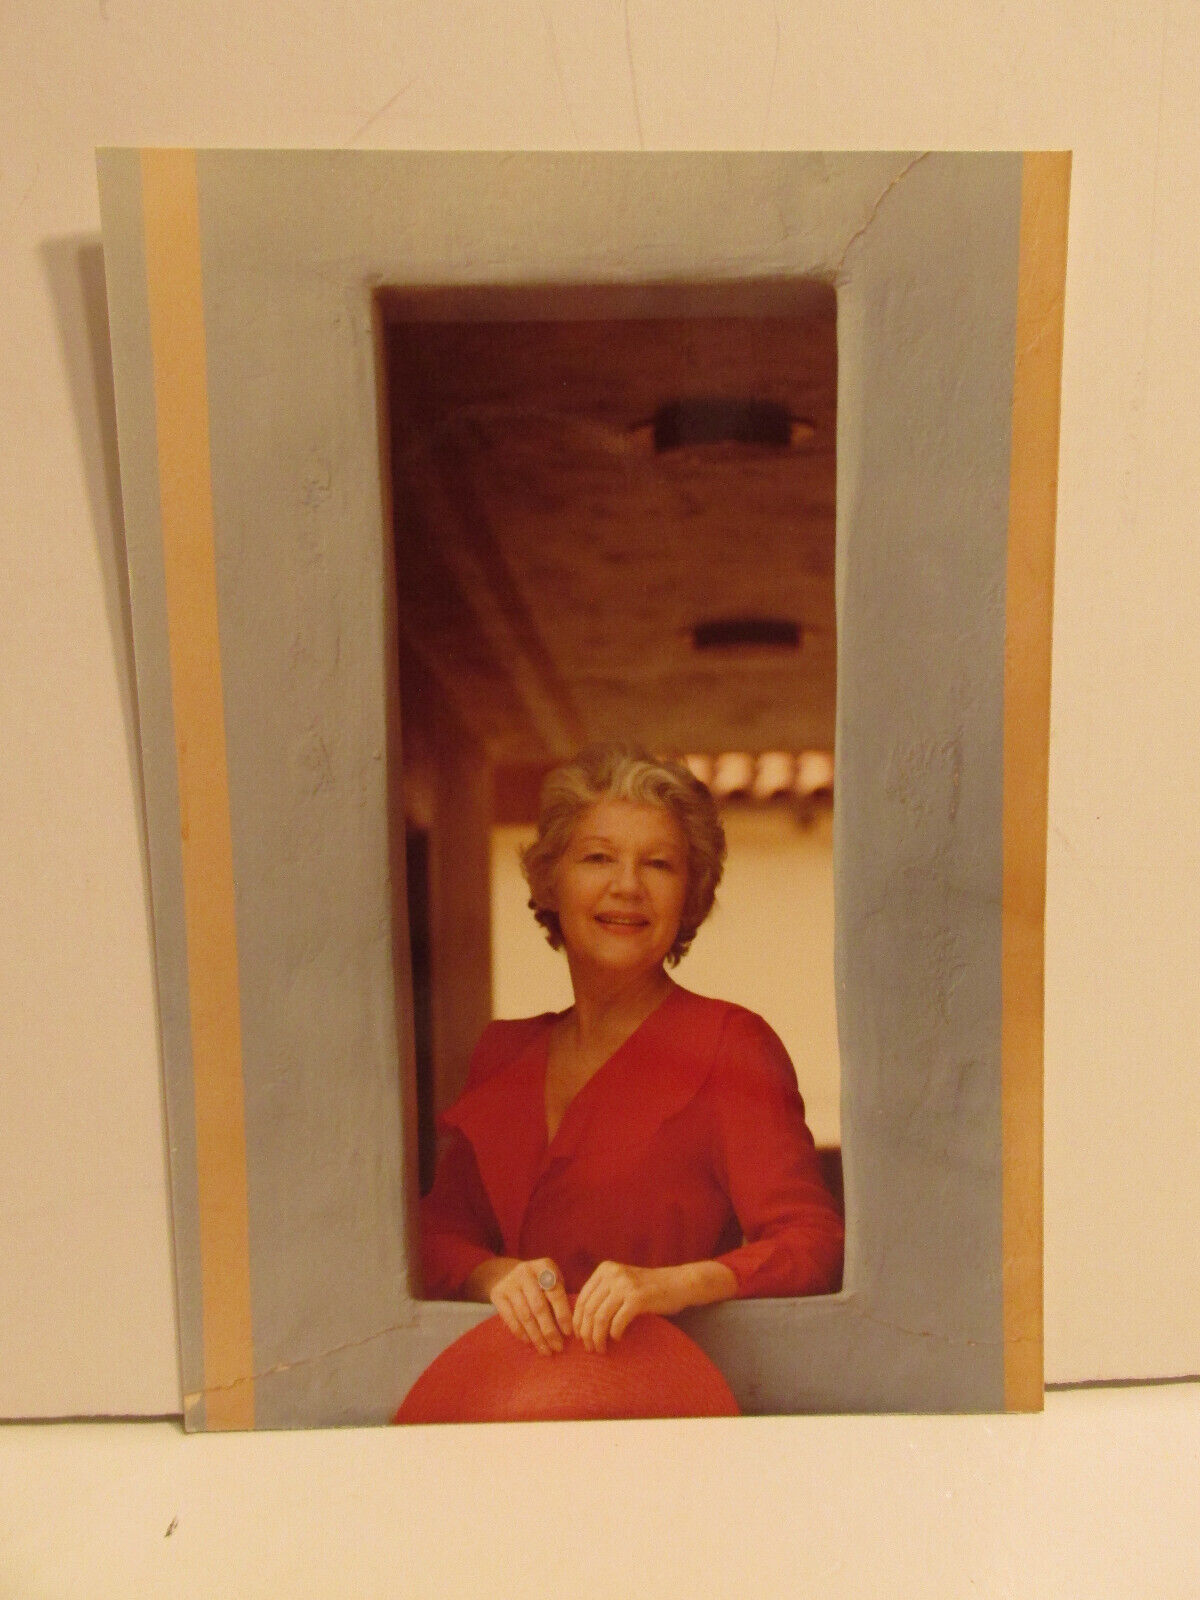 VINTAGE FOUND PHOTOGRAPH COLOR ART OLD PHOTO 1980S UPPER CLASS WHITE WOMAN LADY